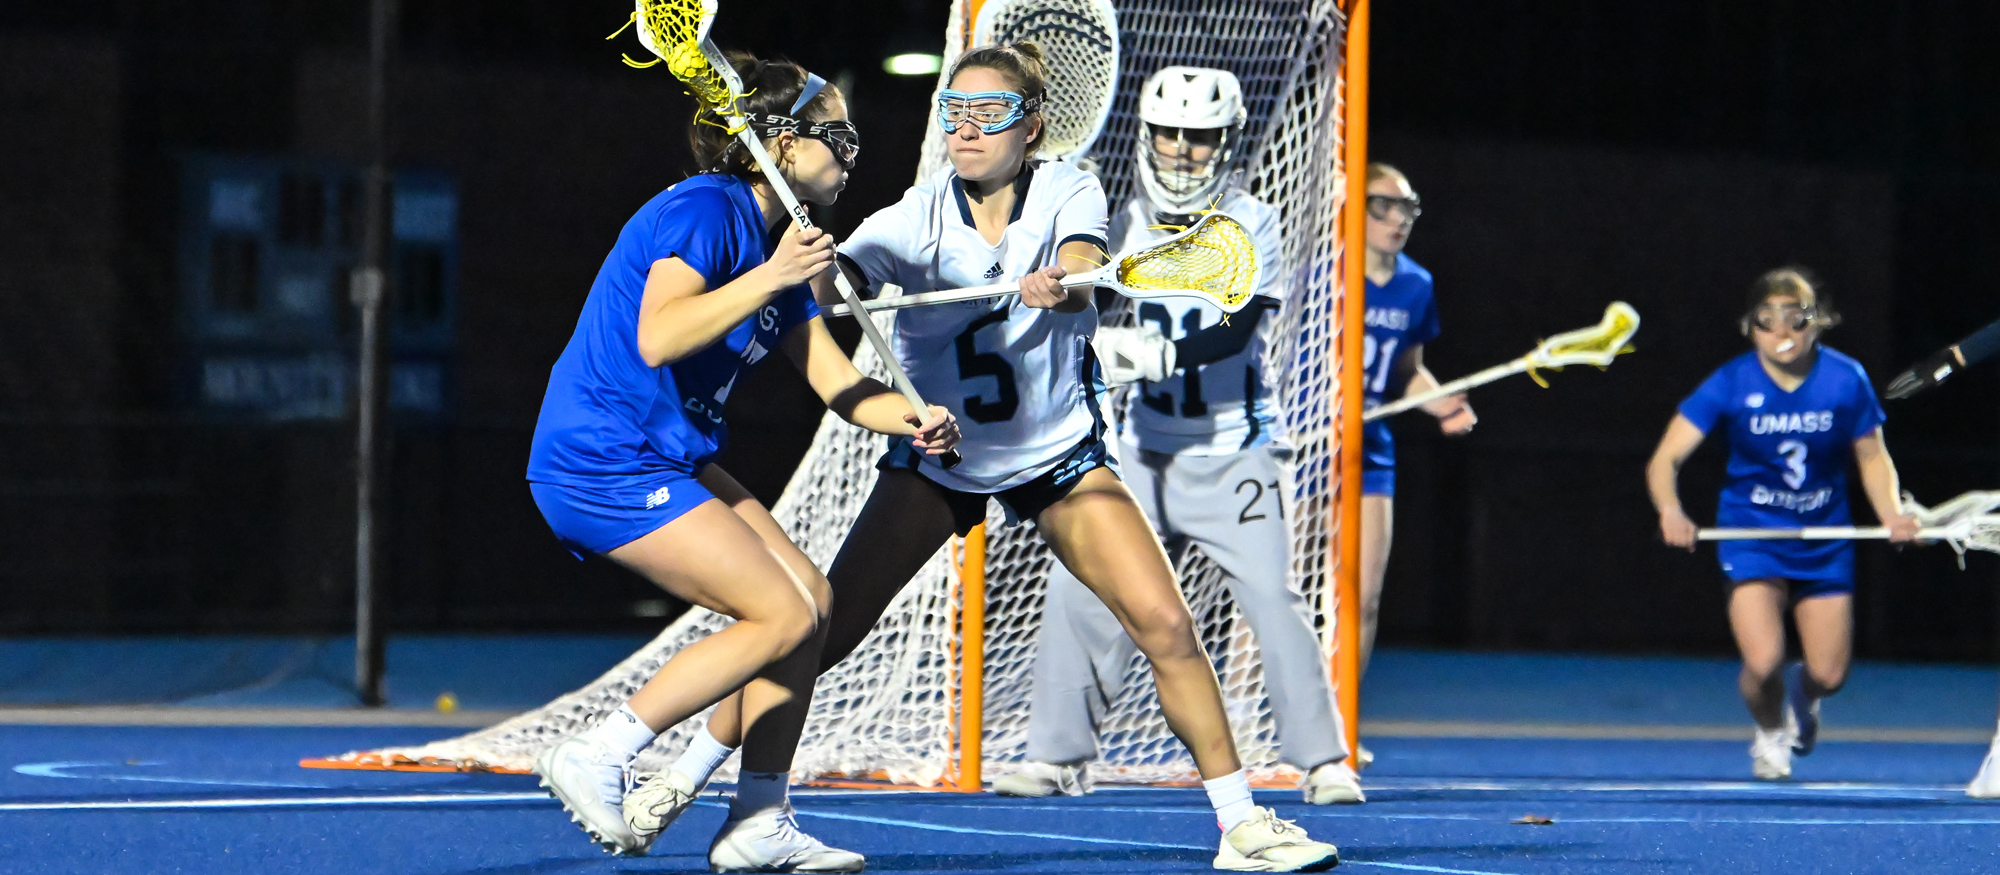 Jane Harmon caused two turnovers and collected two ground balls in Mount Holyoke's season finale against Springfield on April 24, 2024. (RJB Sports file photo)